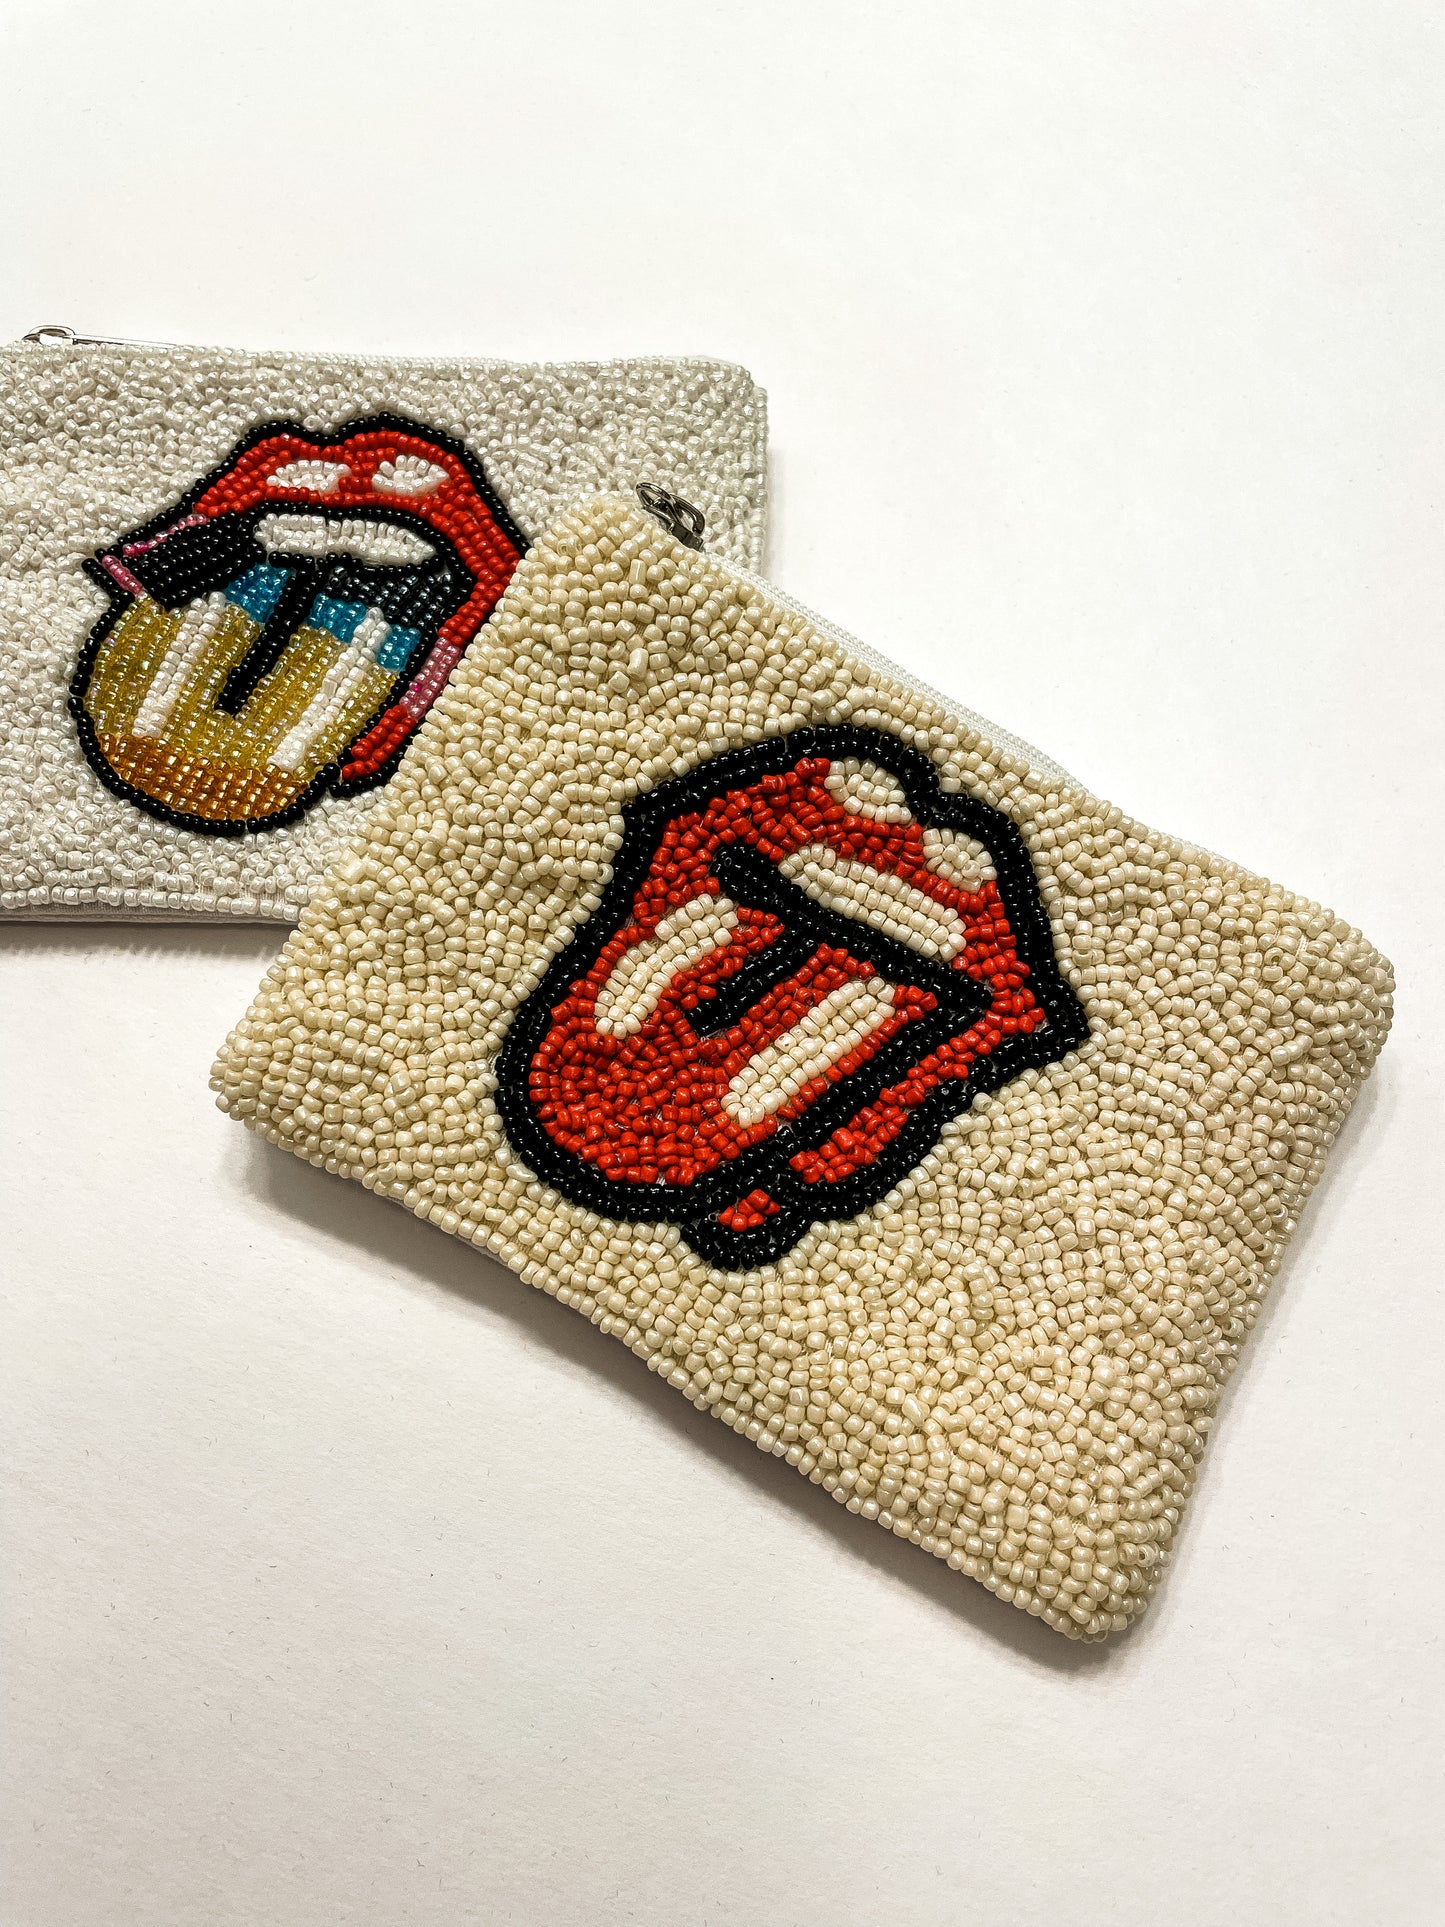 Rolling Stones Beaded Coin Purse